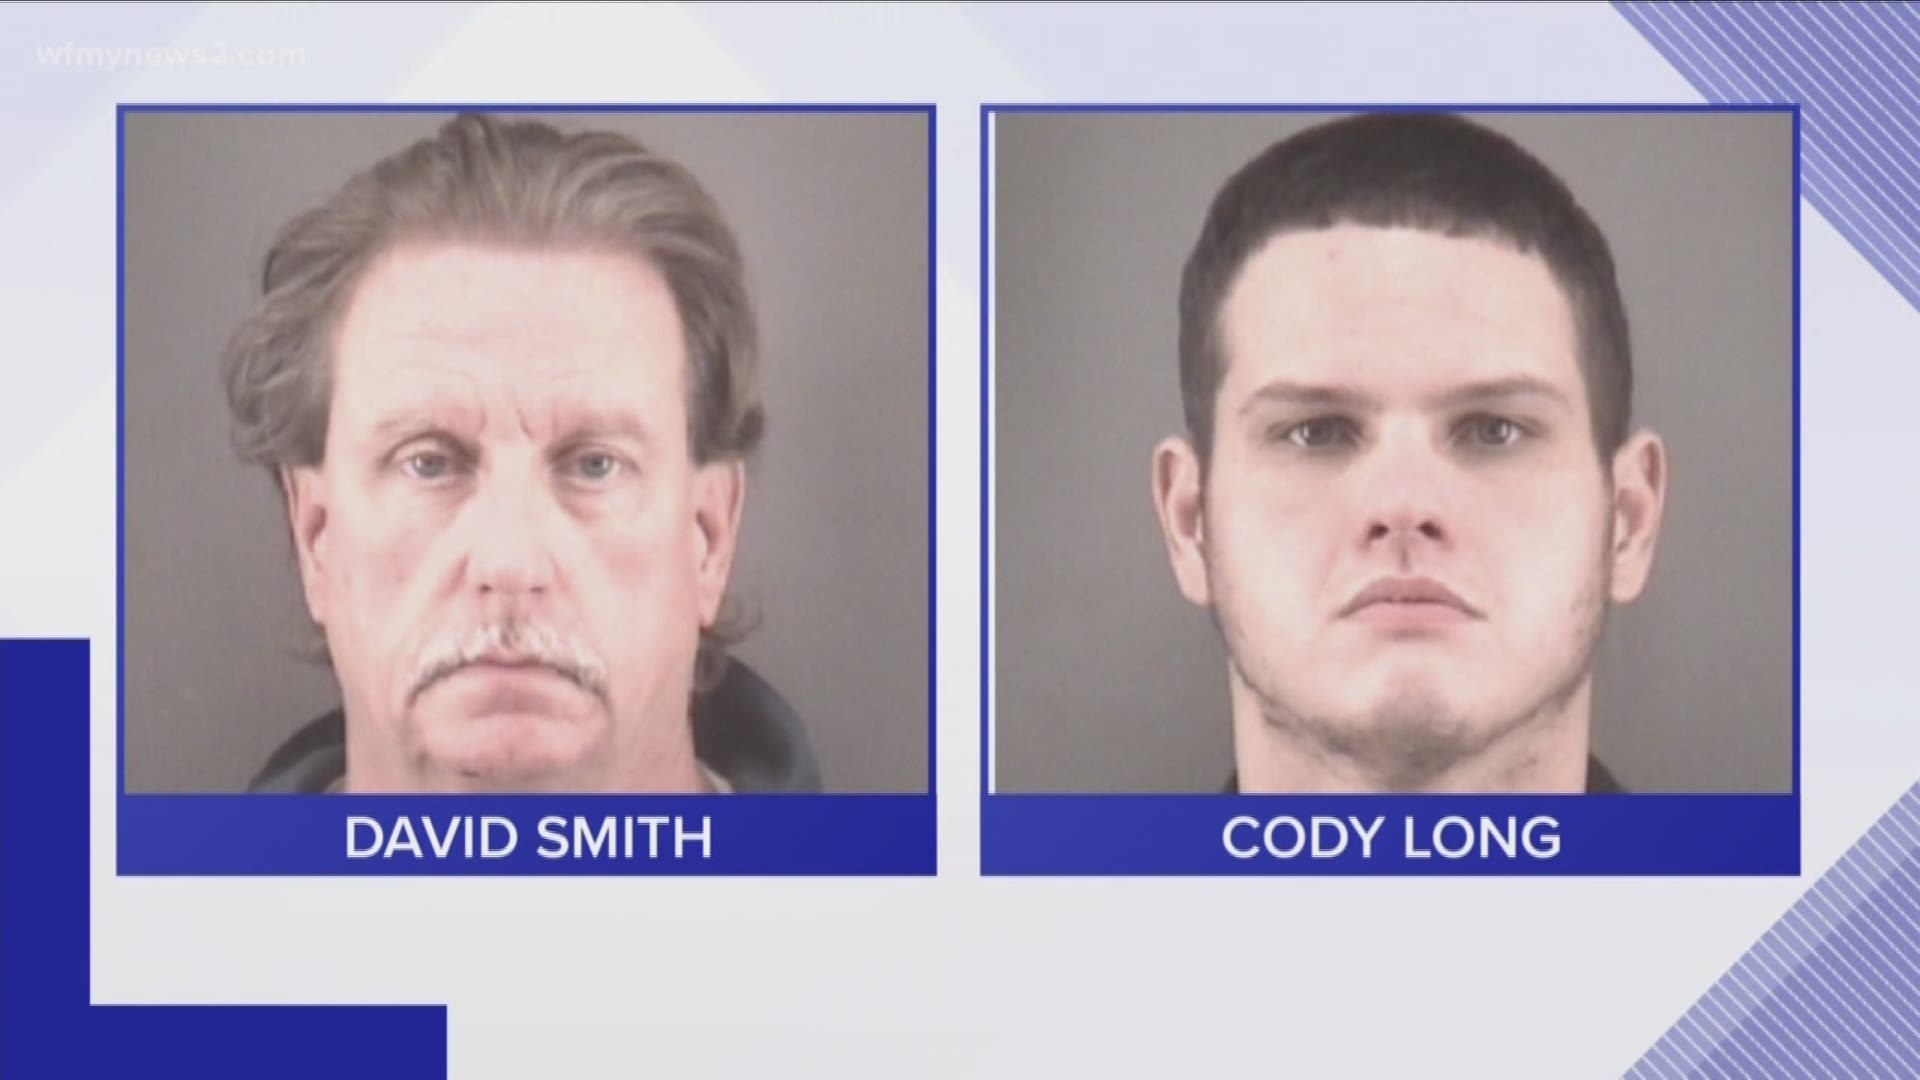 The two suspects face several felonies, including attempted first degree murder, tied to a robbery and arson at a convenience store in Clemmons.